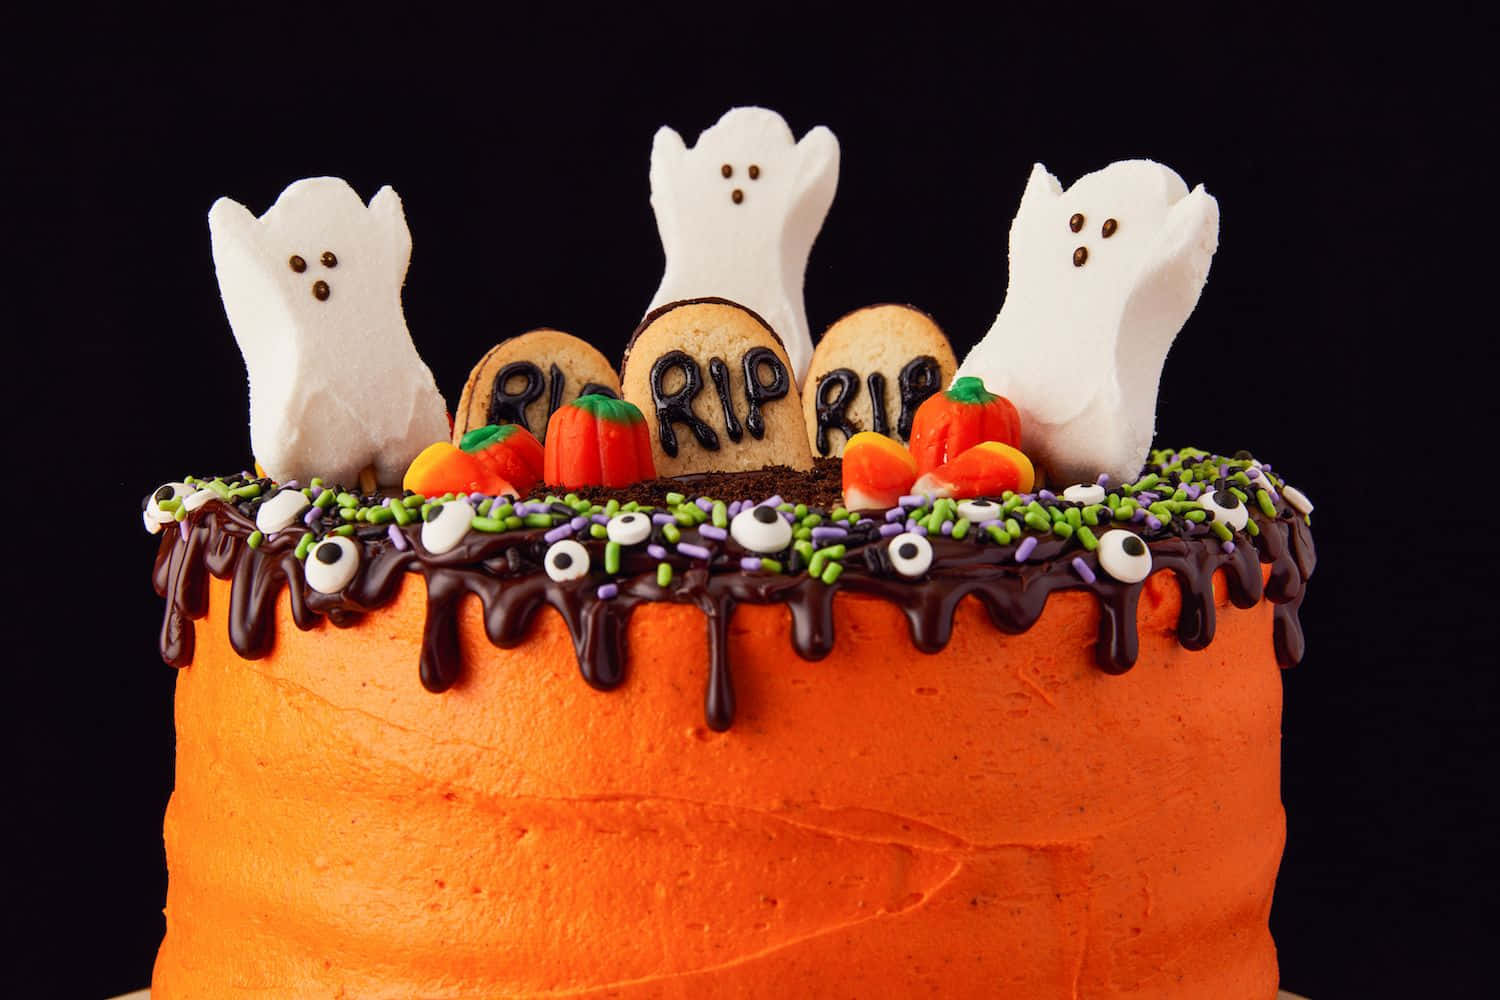 A Halloween Cake With Ghosts And Pumpkins On Top